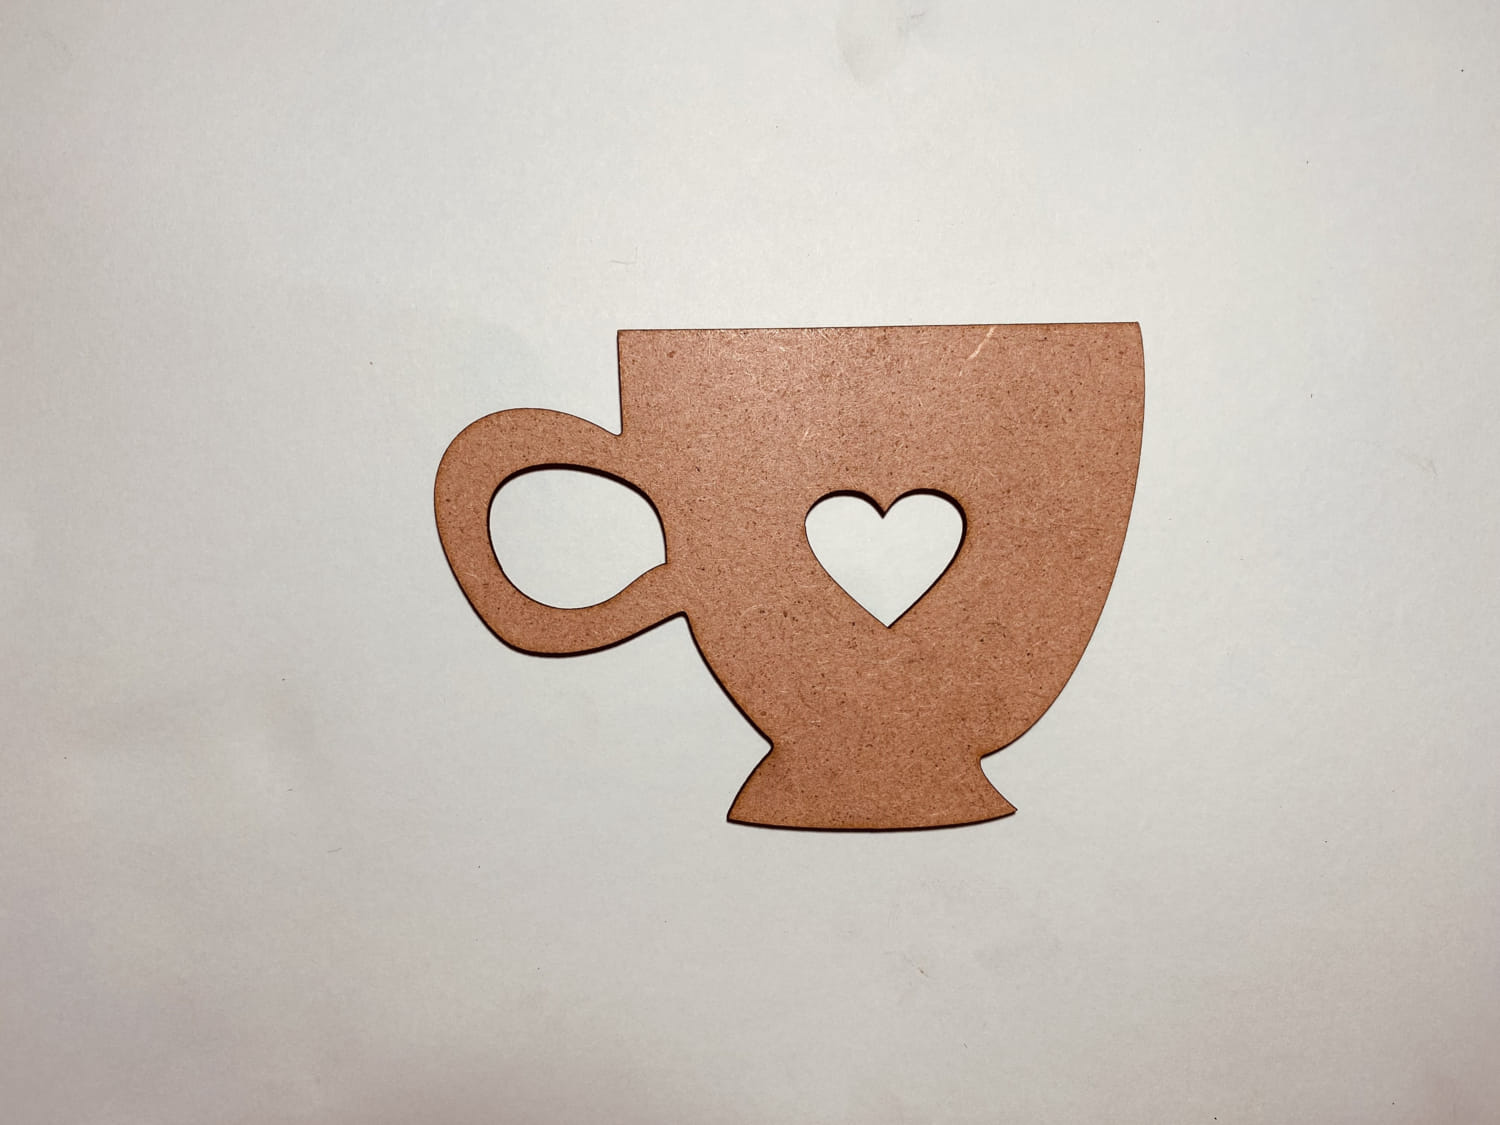 Laser Cut Coffee Cup Unfinished Wood Shape Craft Free Vector